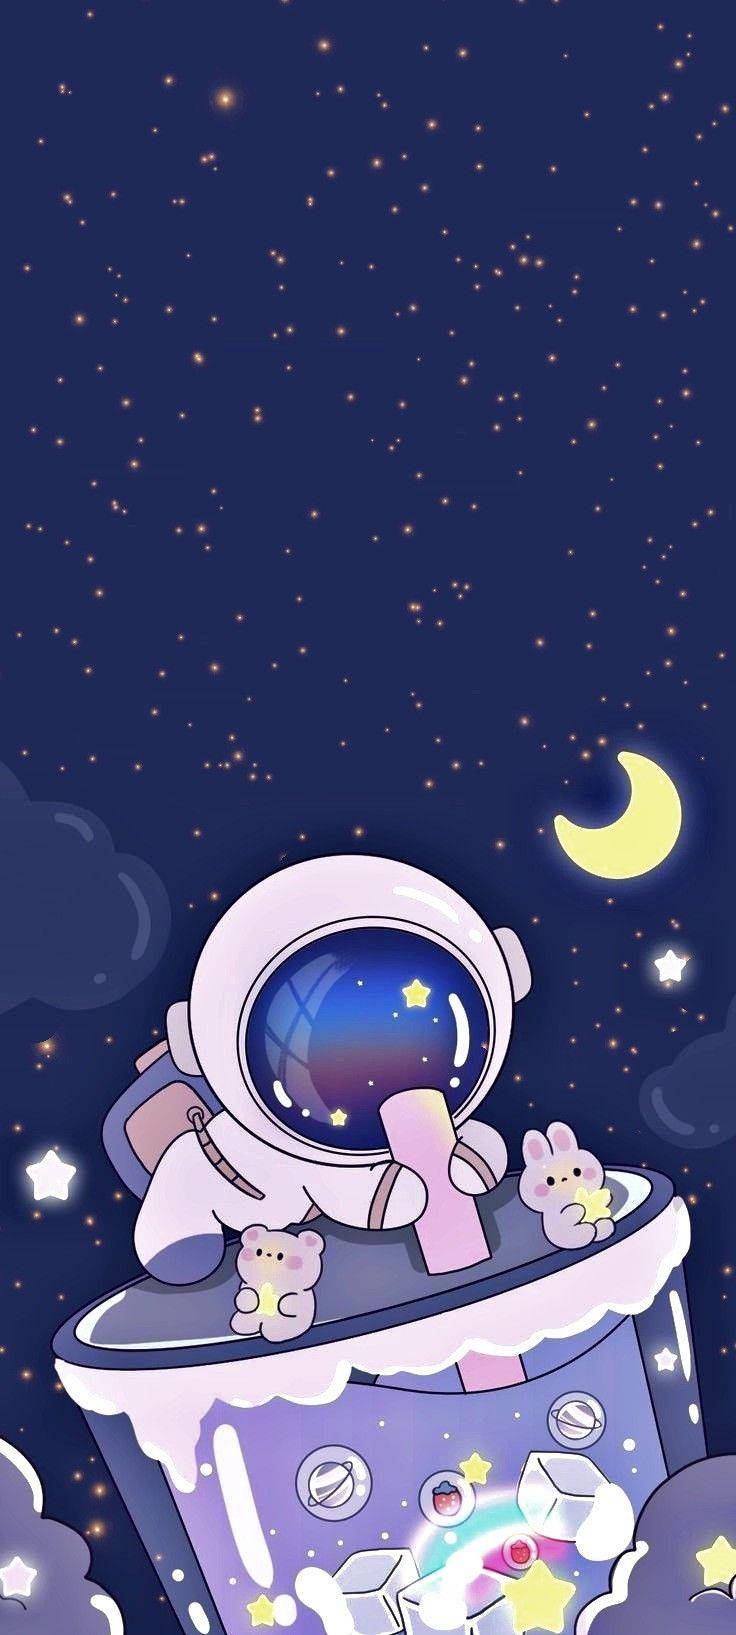 Cartoon Astronaut Sipping From Large Cup Wallpaper